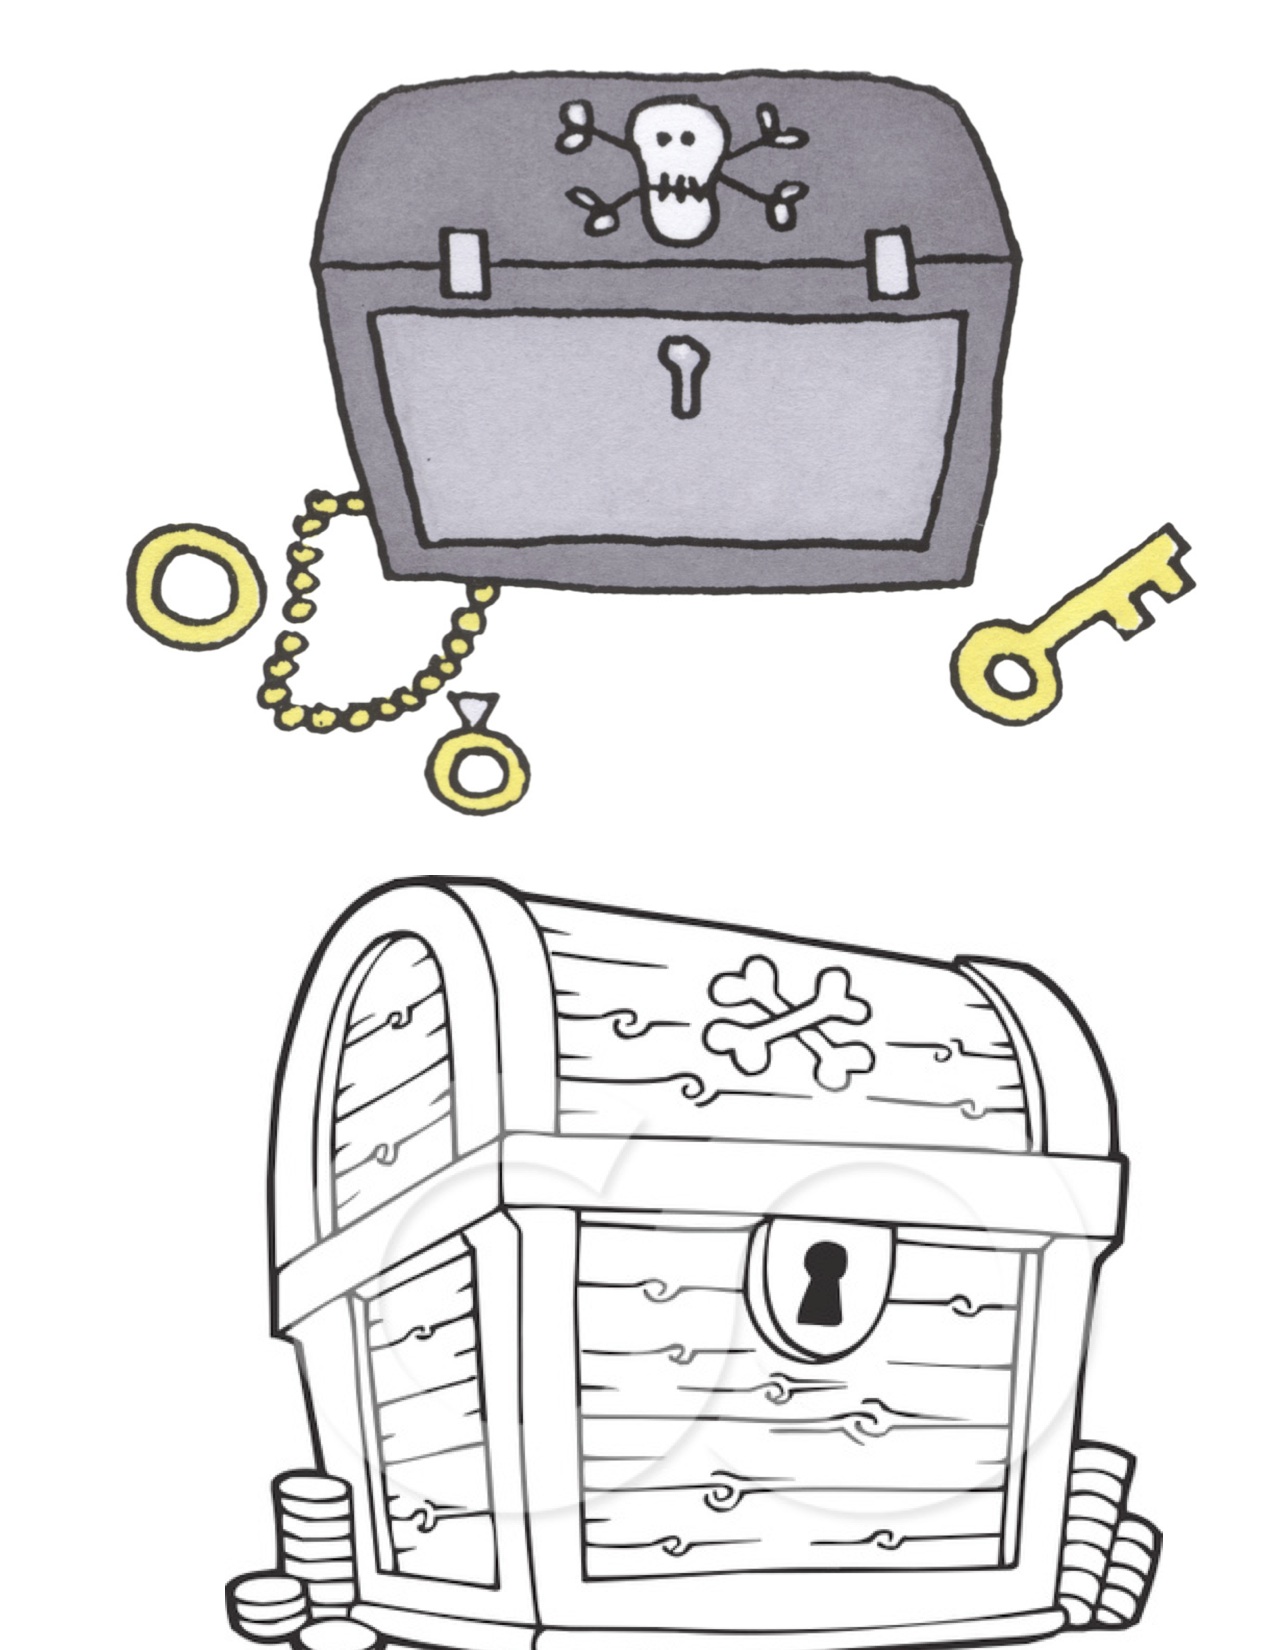 Gave Several Kinds Of Treasure Chest Clip Art Pictures Because I Don